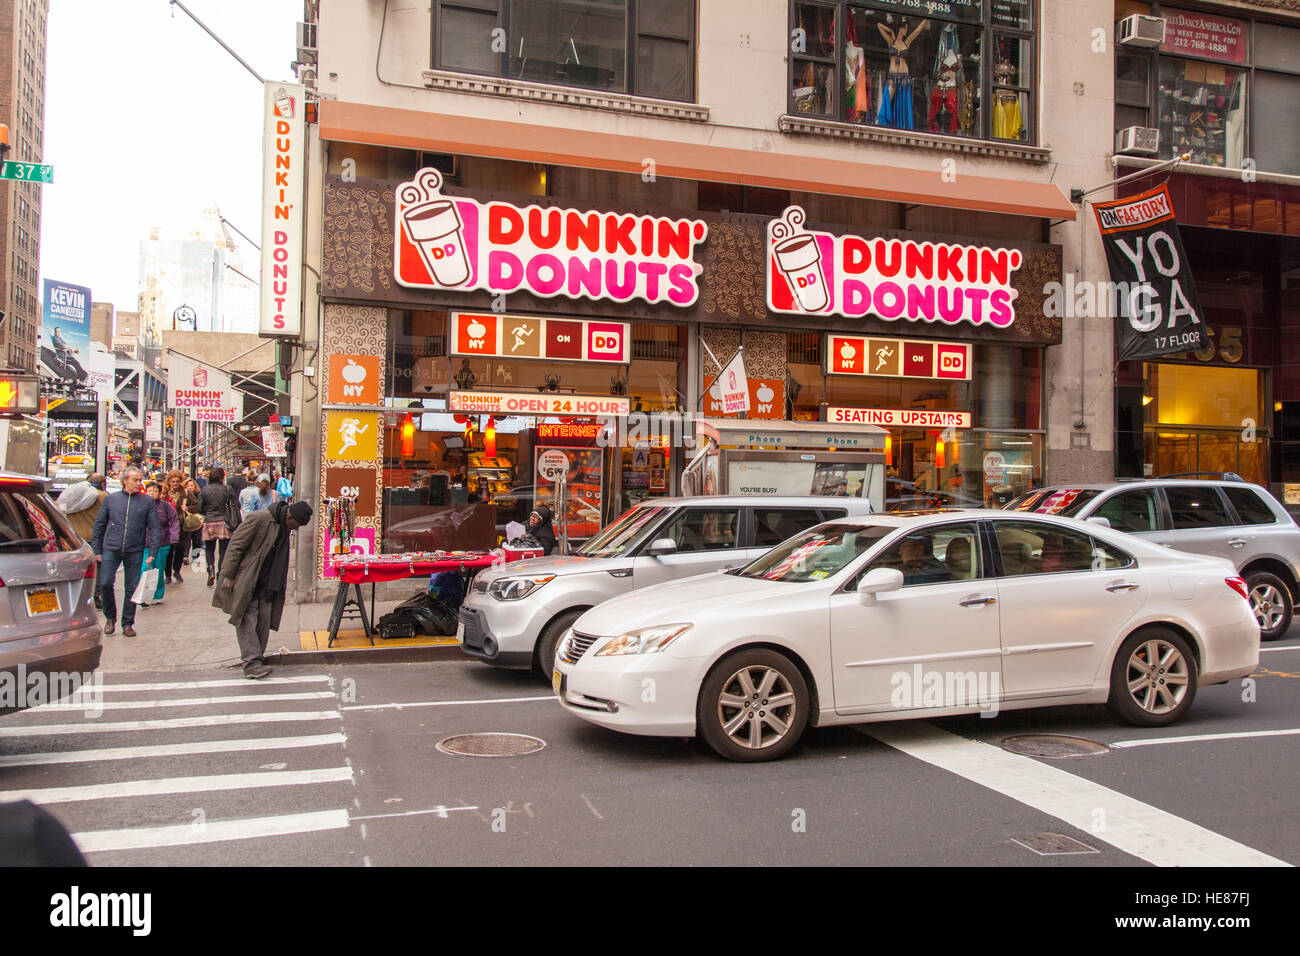 Dunkin' Donuts New York City, United States of America. Stock Photo